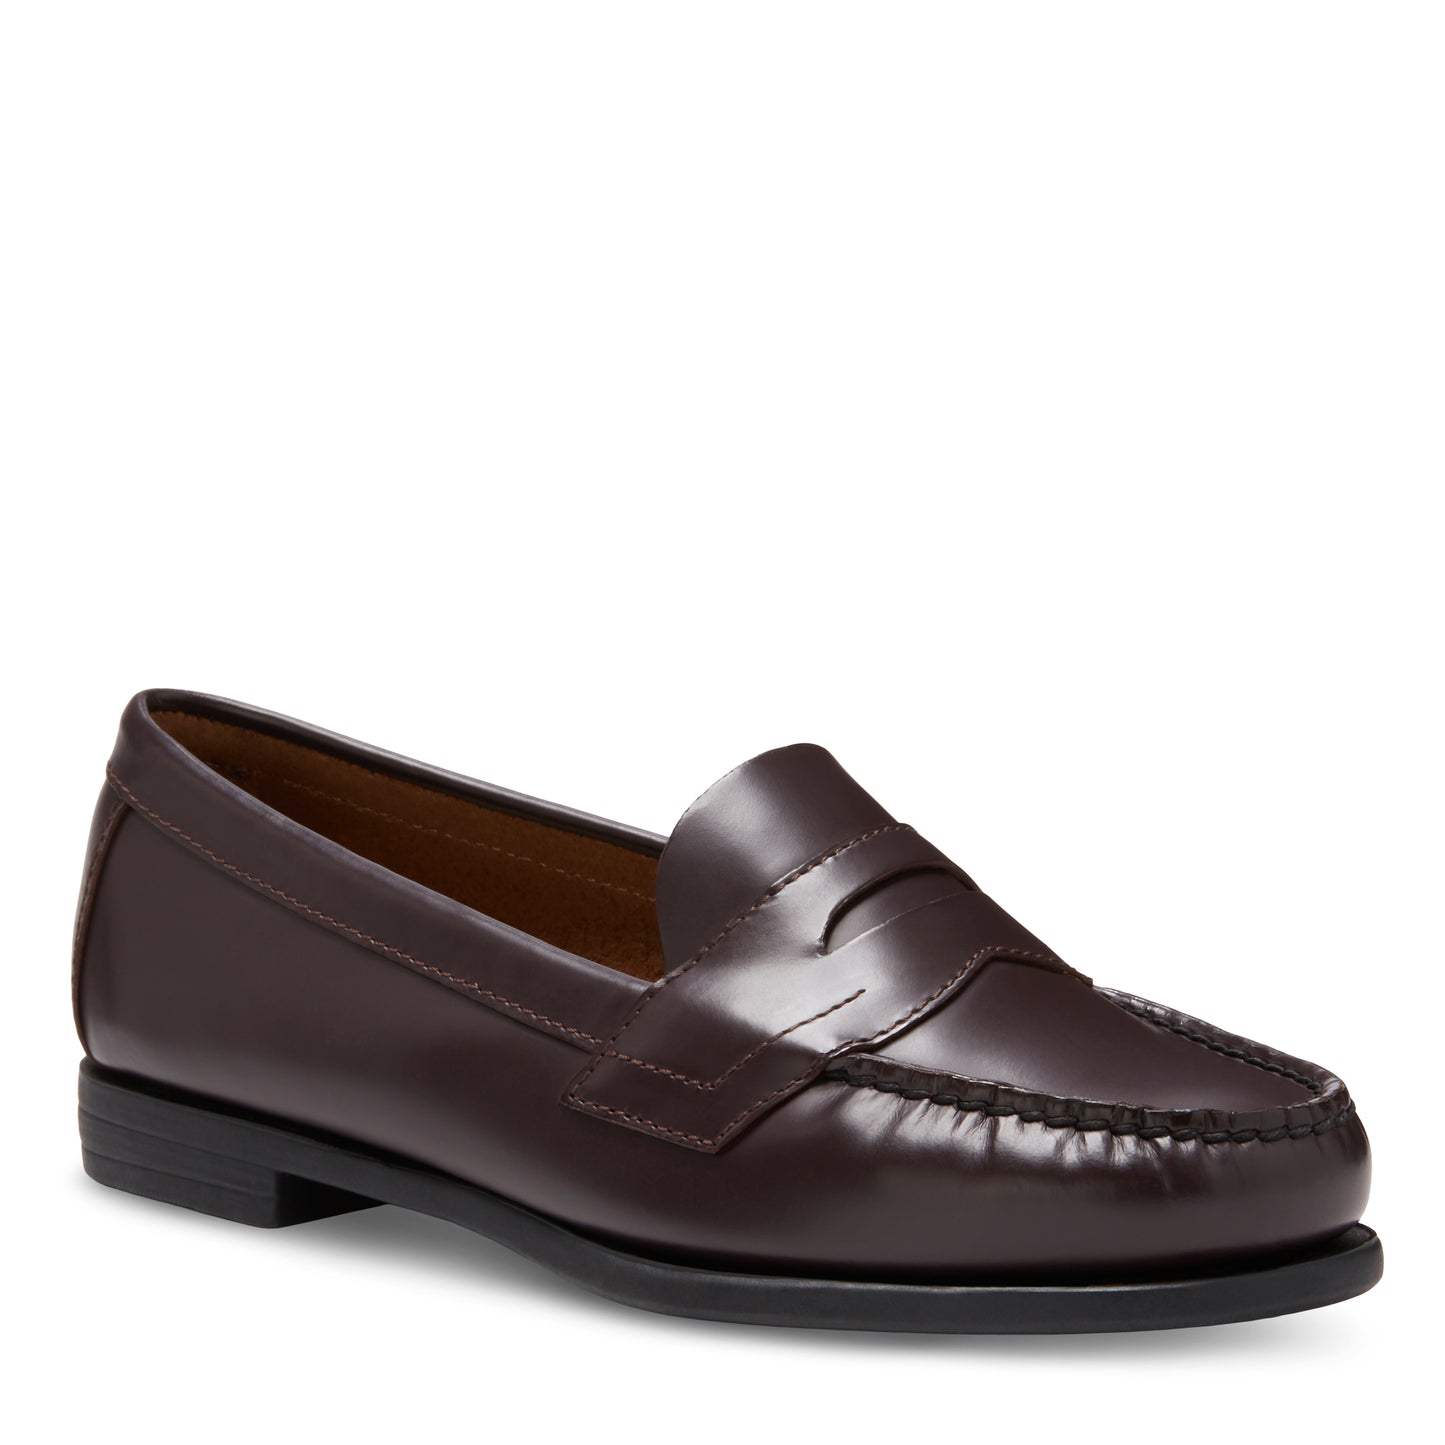 Women's Classic Penny Loafer Burgundy